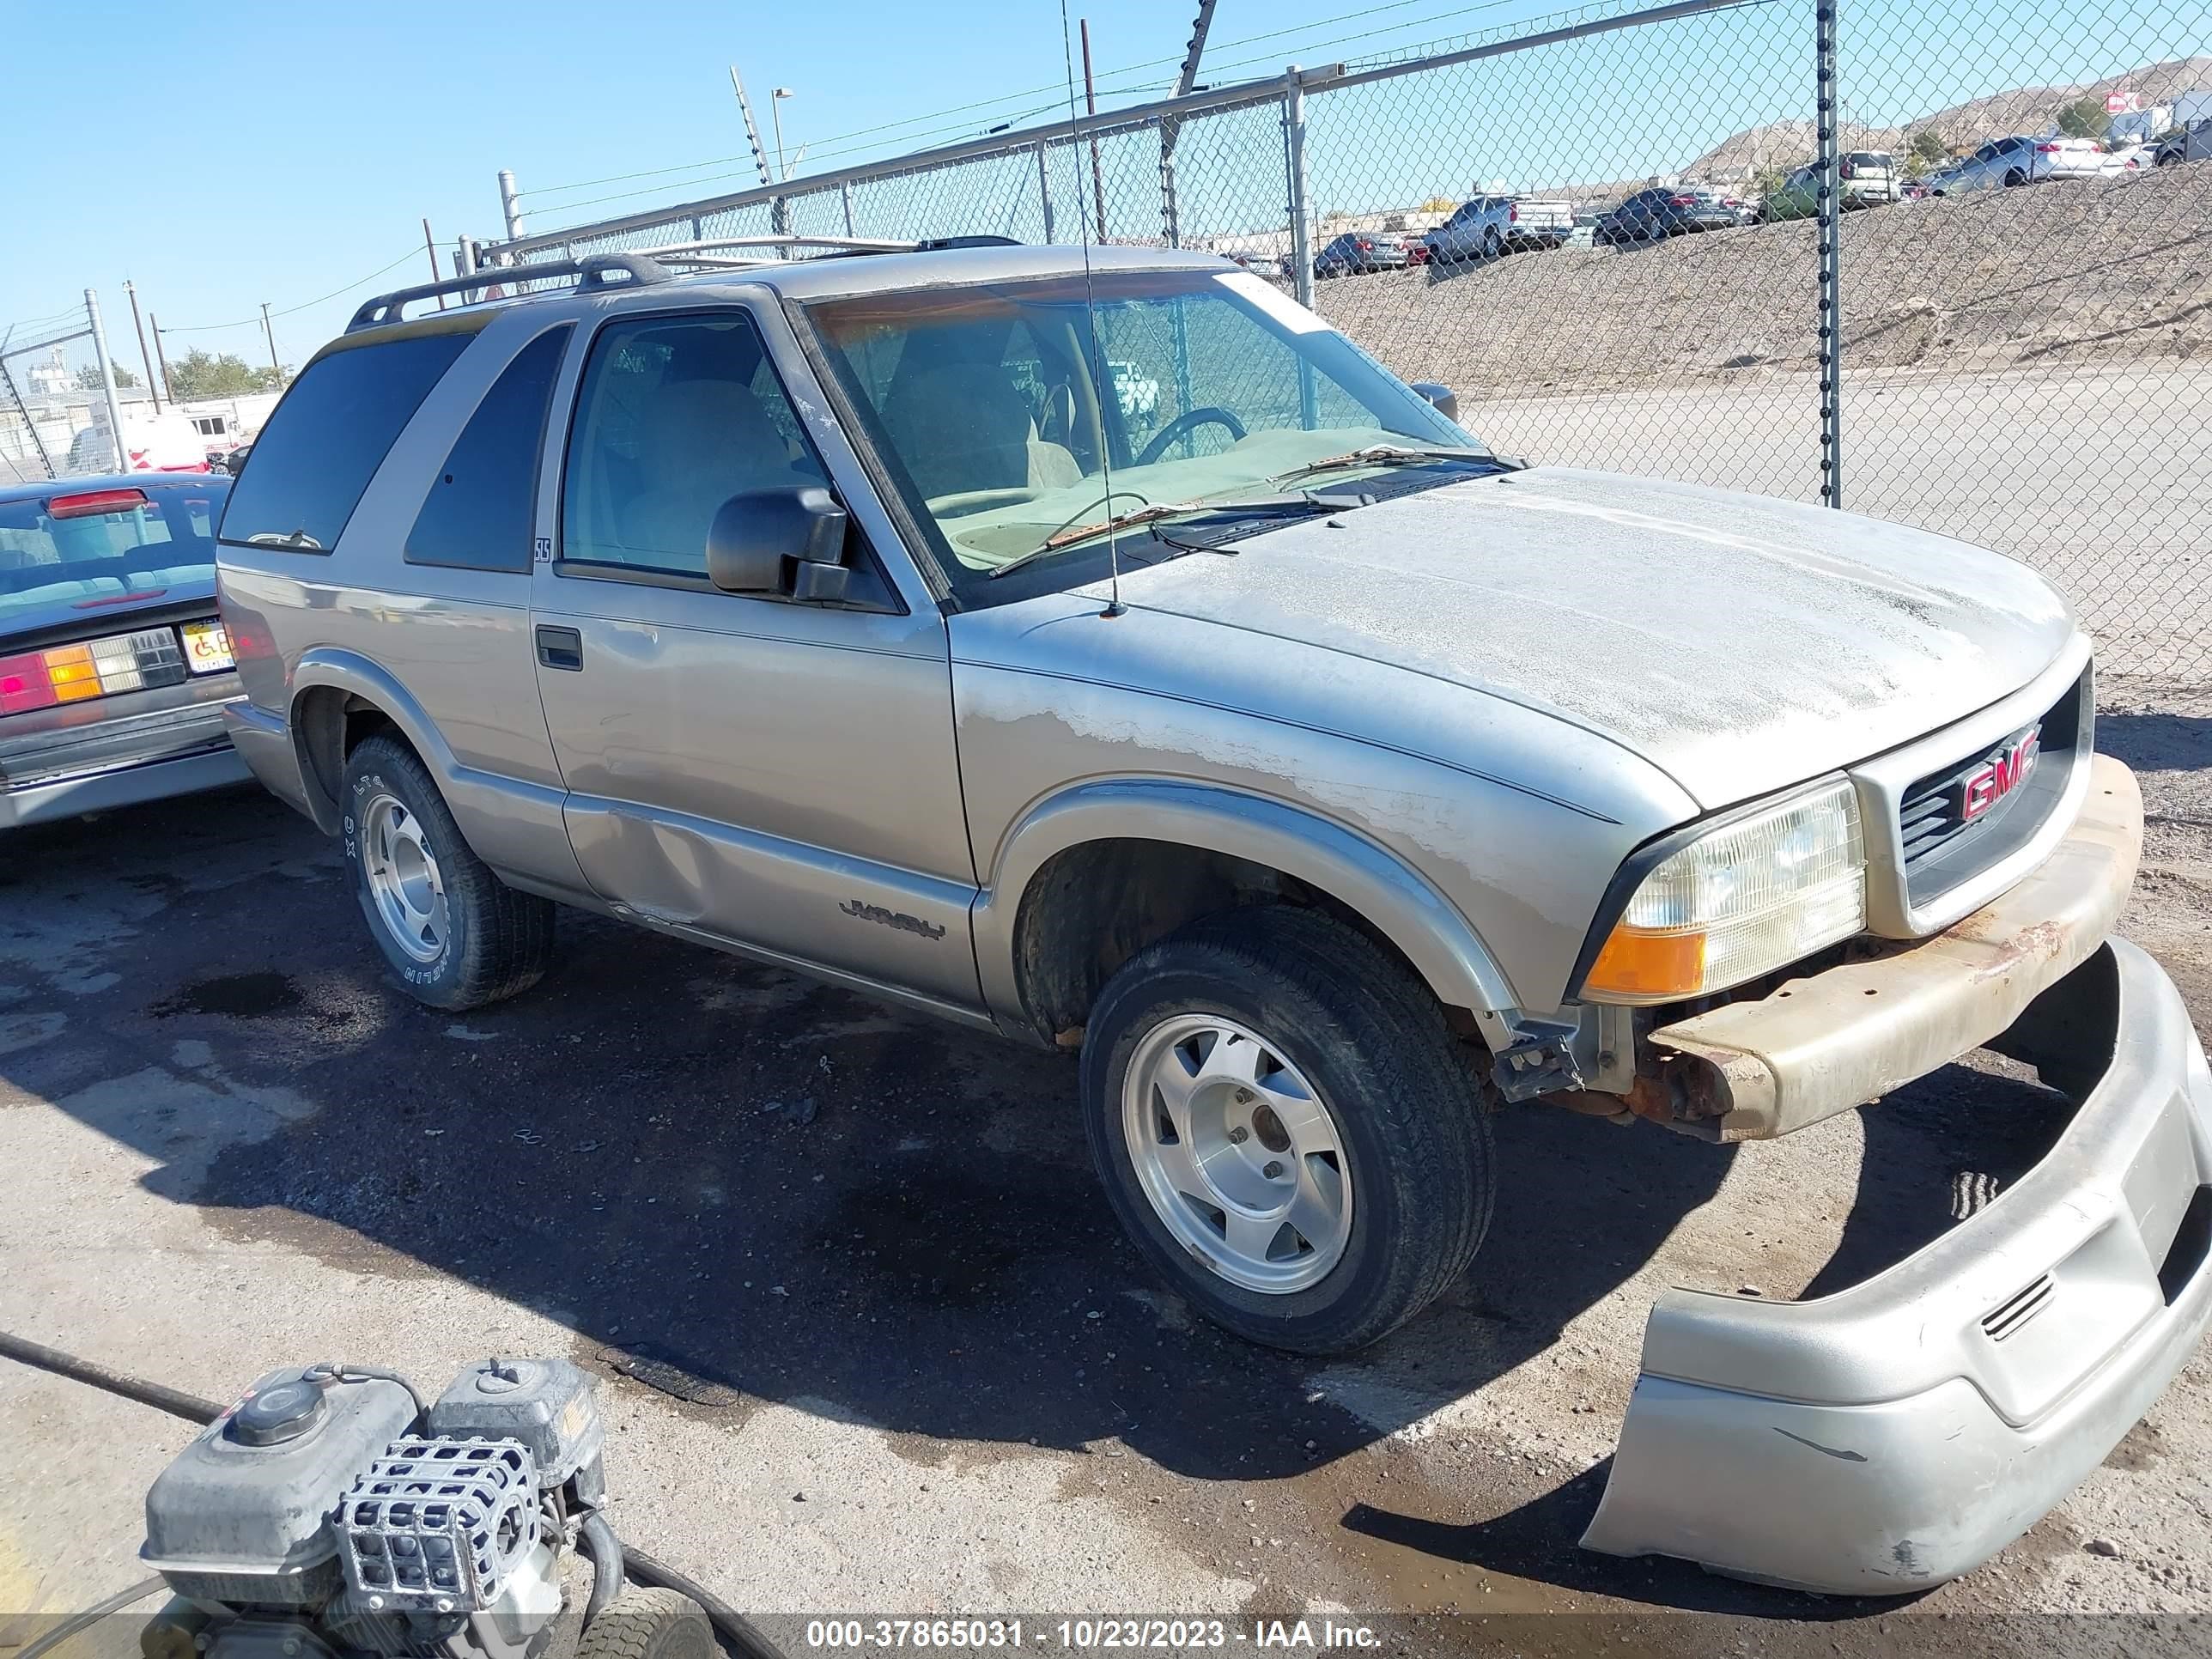 vin: 1GKCS18W8YK221663 1GKCS18W8YK221663 2000 gmc jimmy 4300 for Sale in 87105, 4400 Broadway S.e., Albuquerque, New Mexico, USA